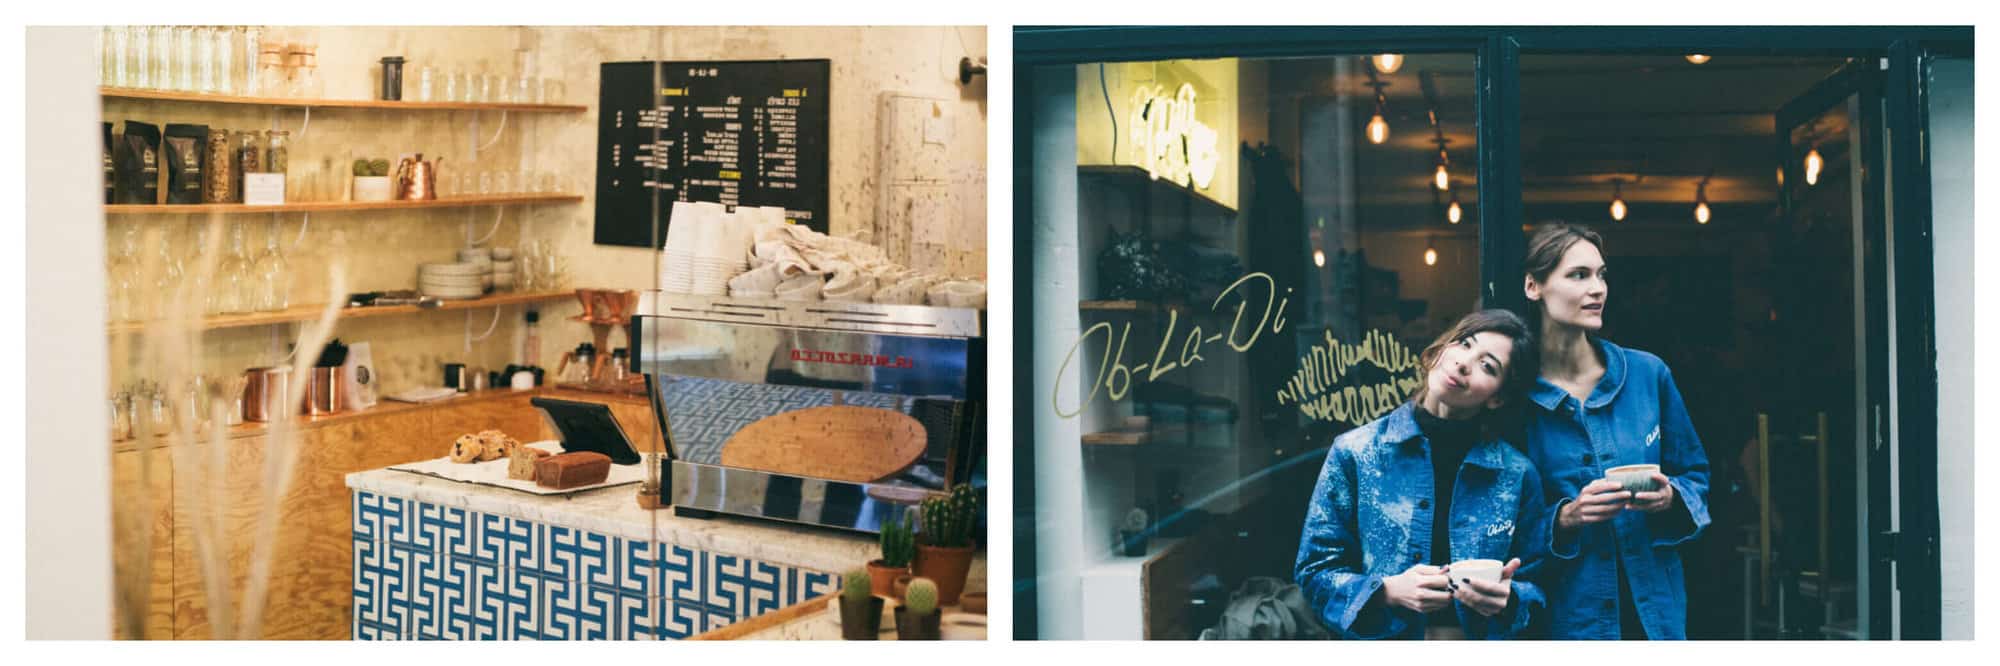 Left: a photo of the coffee counter and machine at the Ob-La-Di cafe in Pairs. Right: a photo of two workers from the Ob-La-Di cafe in Paris, standing outside the café holding coffees in denim blue jackets. 